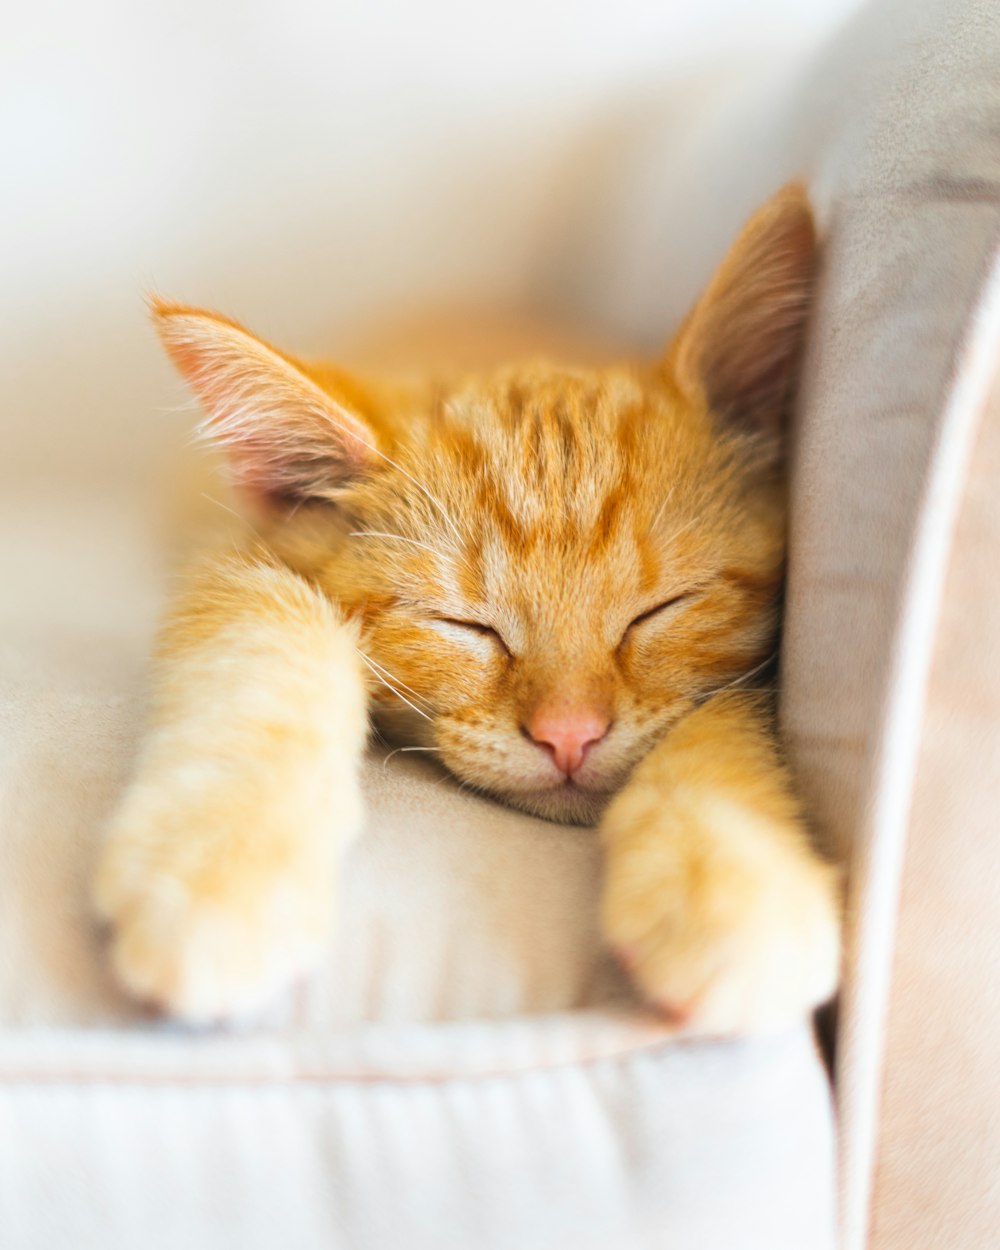 Download Cuddly Relaxing Ginger Cat PFP Wallpaper